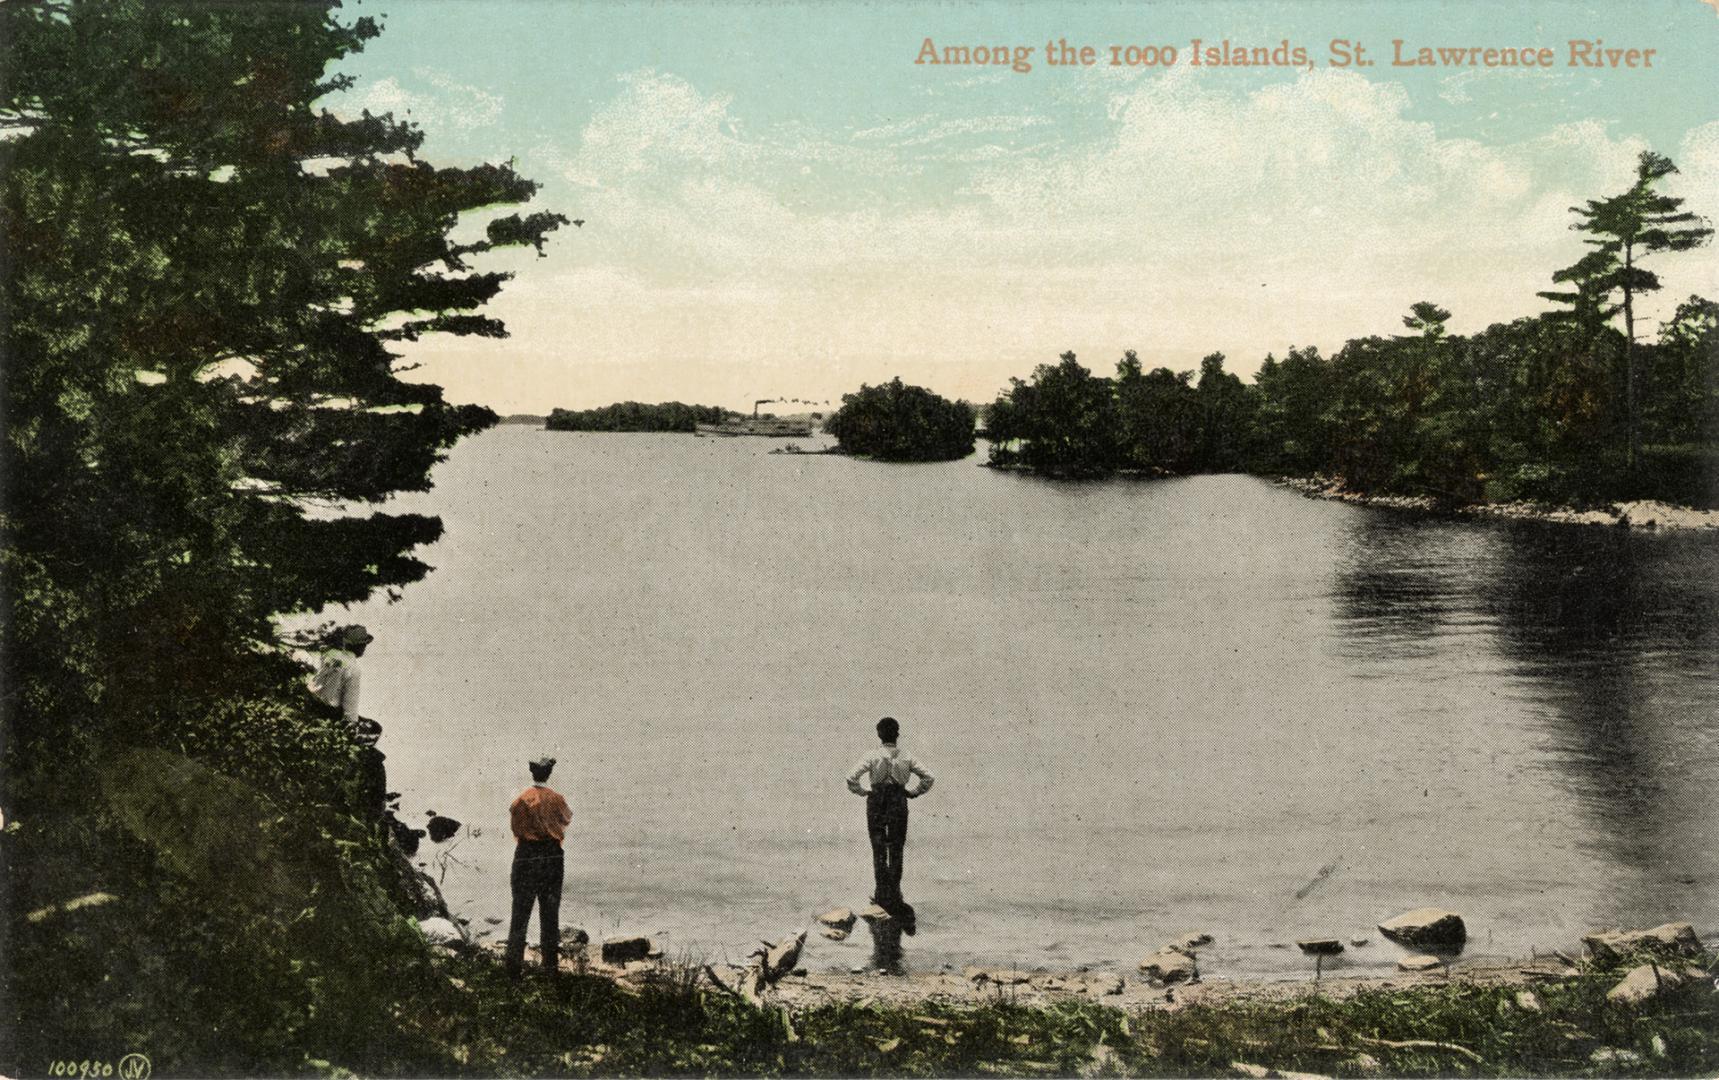 Two men standing on a shoreline watching a steam ship in the distance.